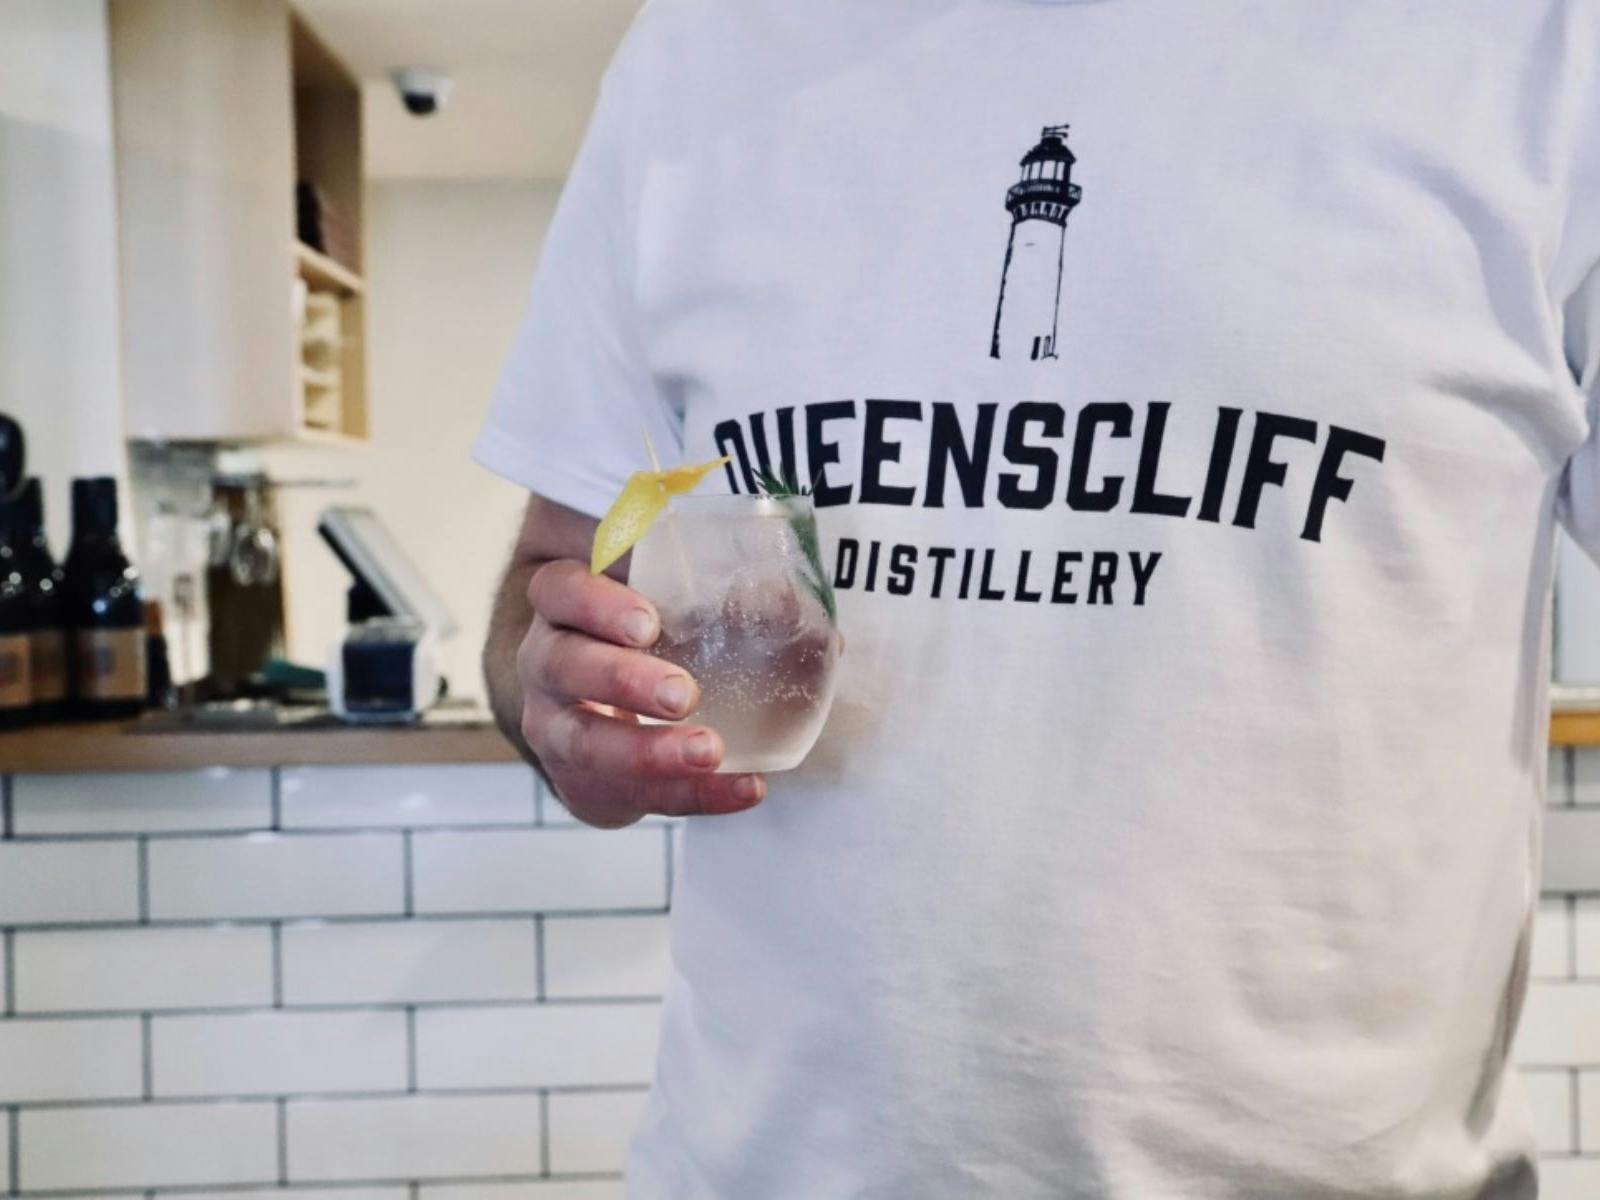 Person wearing Queenscliff Distillery tshirt with a cocktail